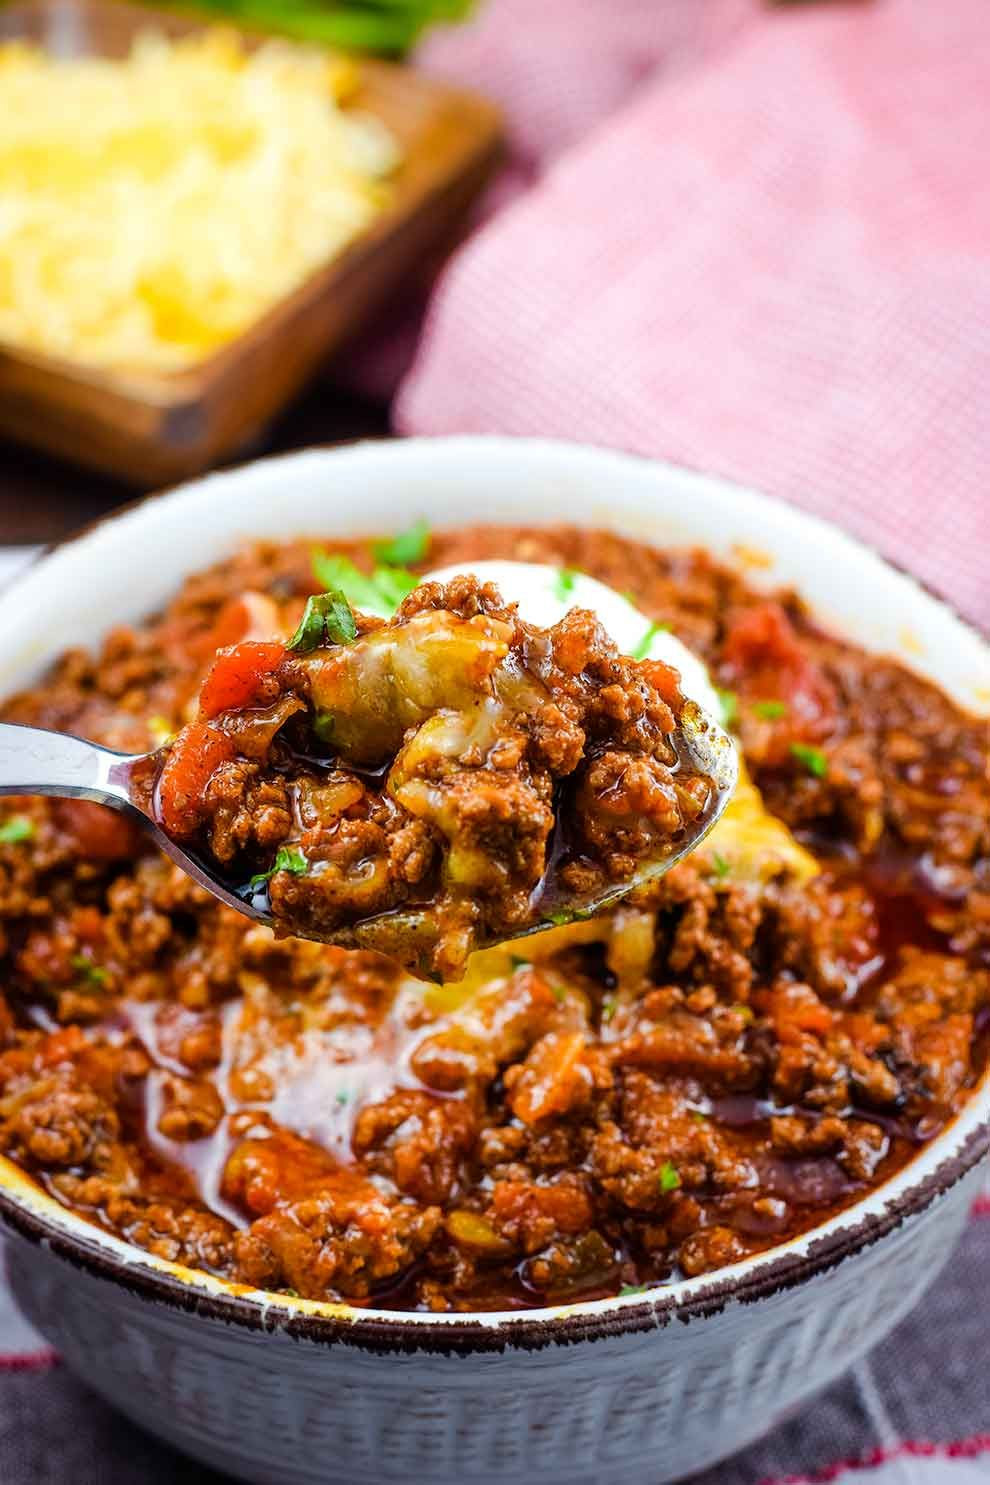 Slow Cooker Keto Chili Recipes
 An easy keto low carb beef chili made in the Instant Pot